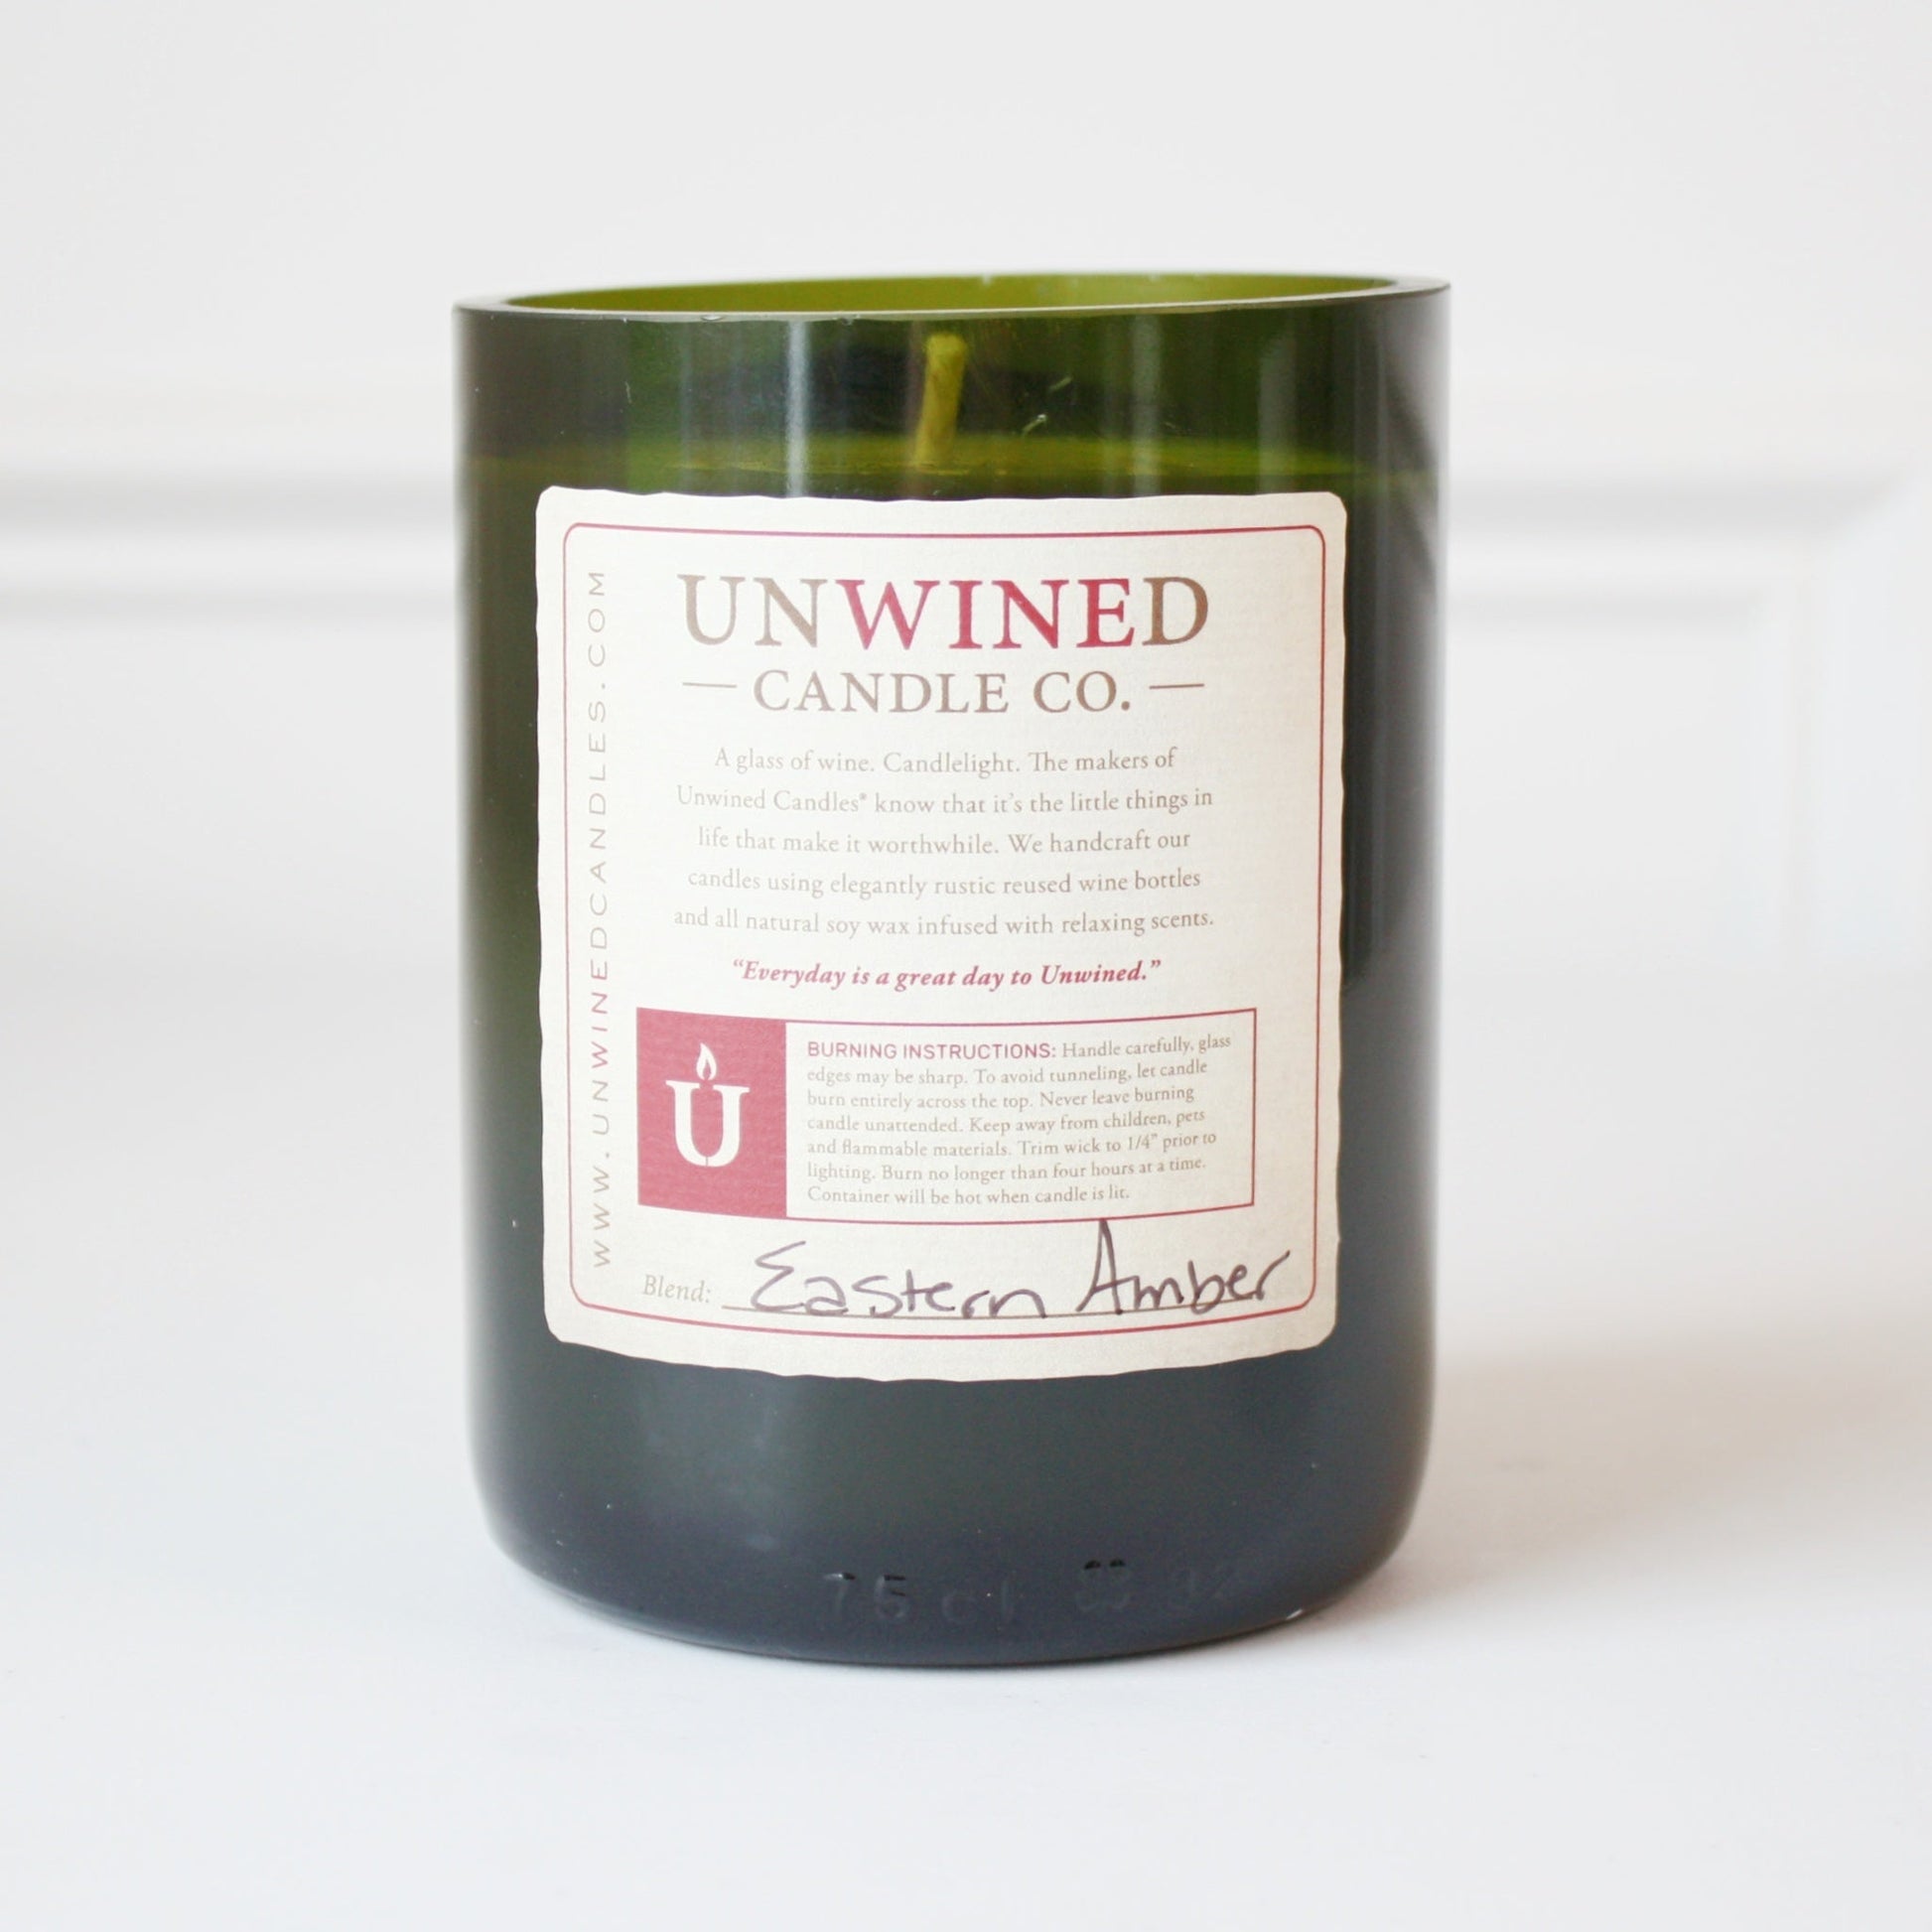 Recycled Wine Bottle Soy Candle - Eastern Amber - Made in the USA